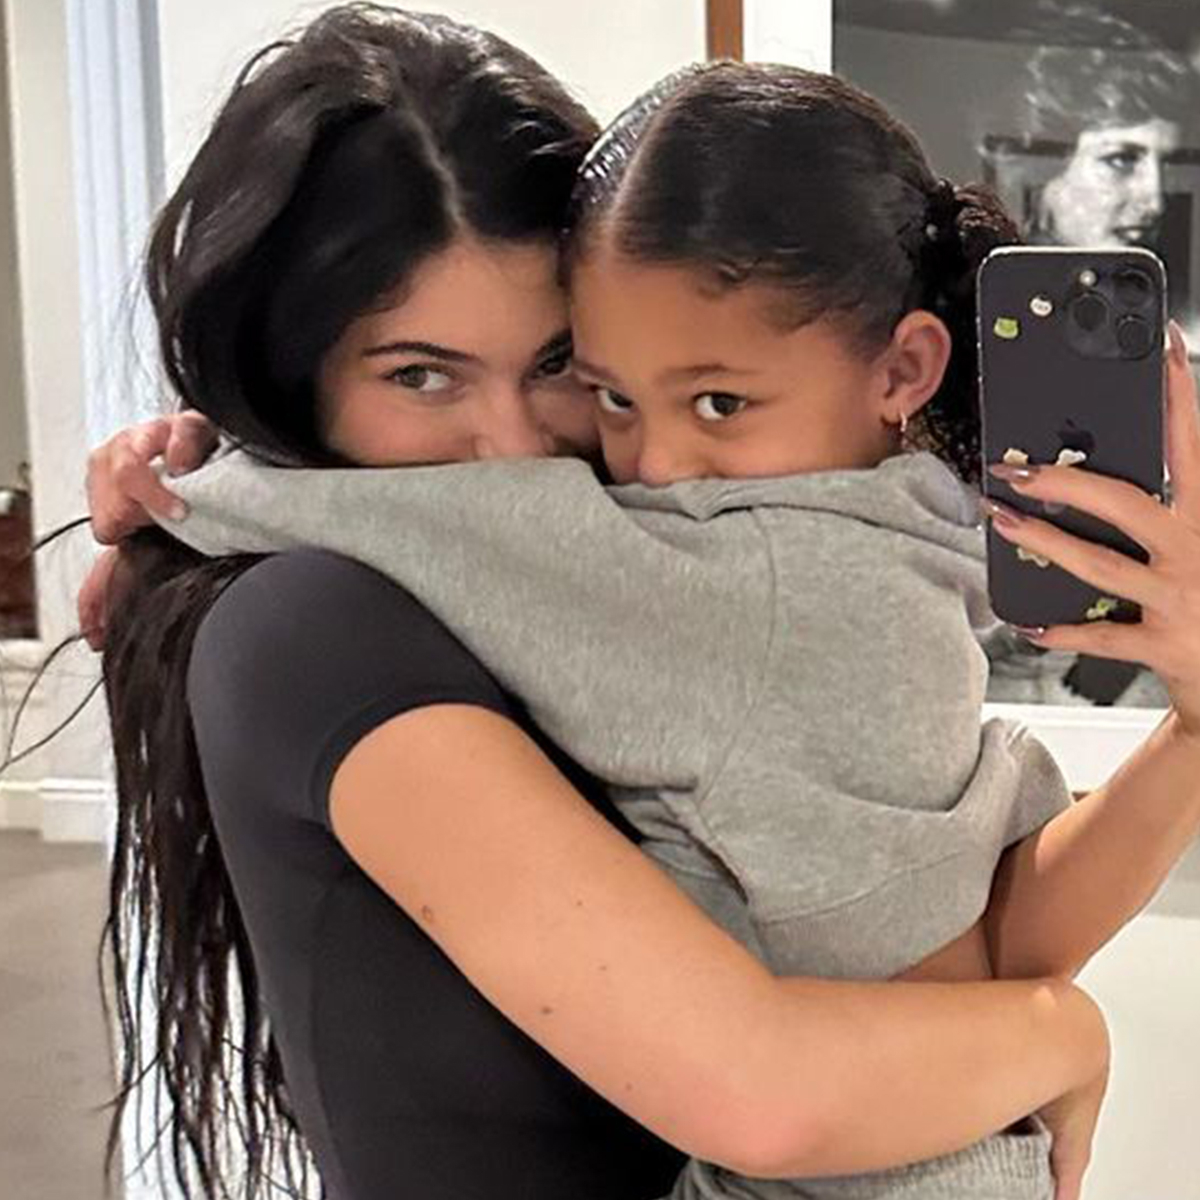 Kylie Jenner Trolls Daughter Stormi for Not Giving Her Enough Privacy